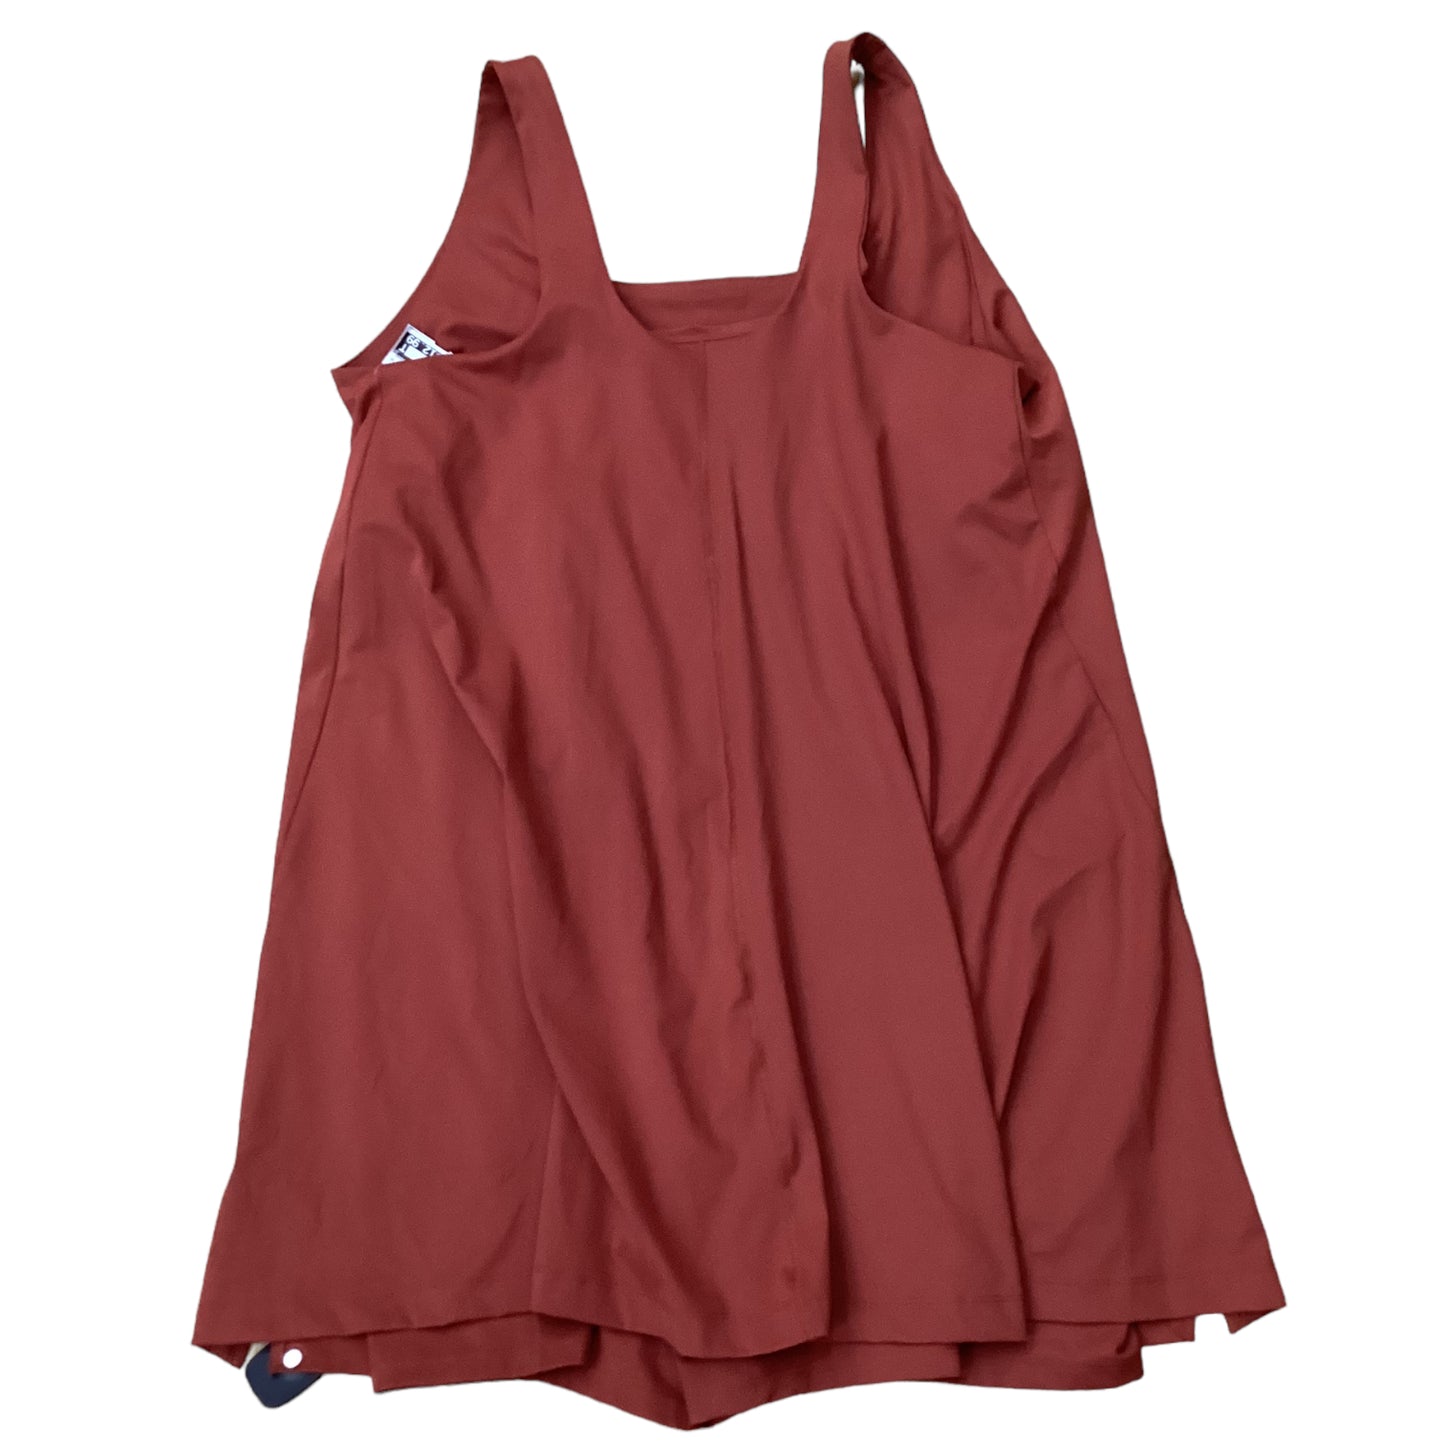 Athletic Dress By Old Navy  Size: 3x